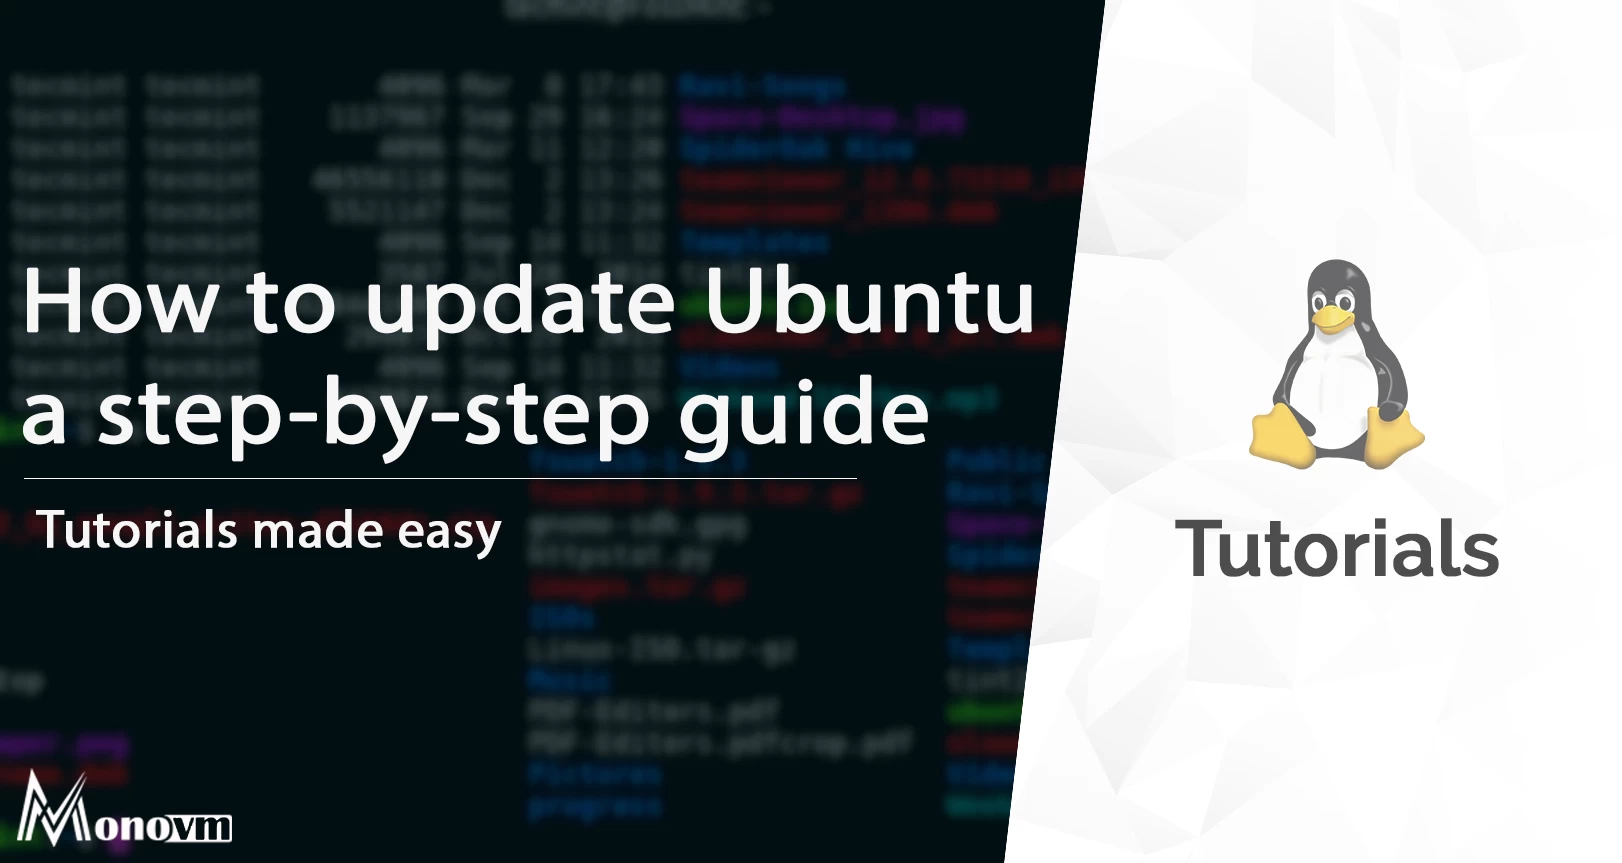 How to Update Ubuntu Easily: Step-by-Step Guide